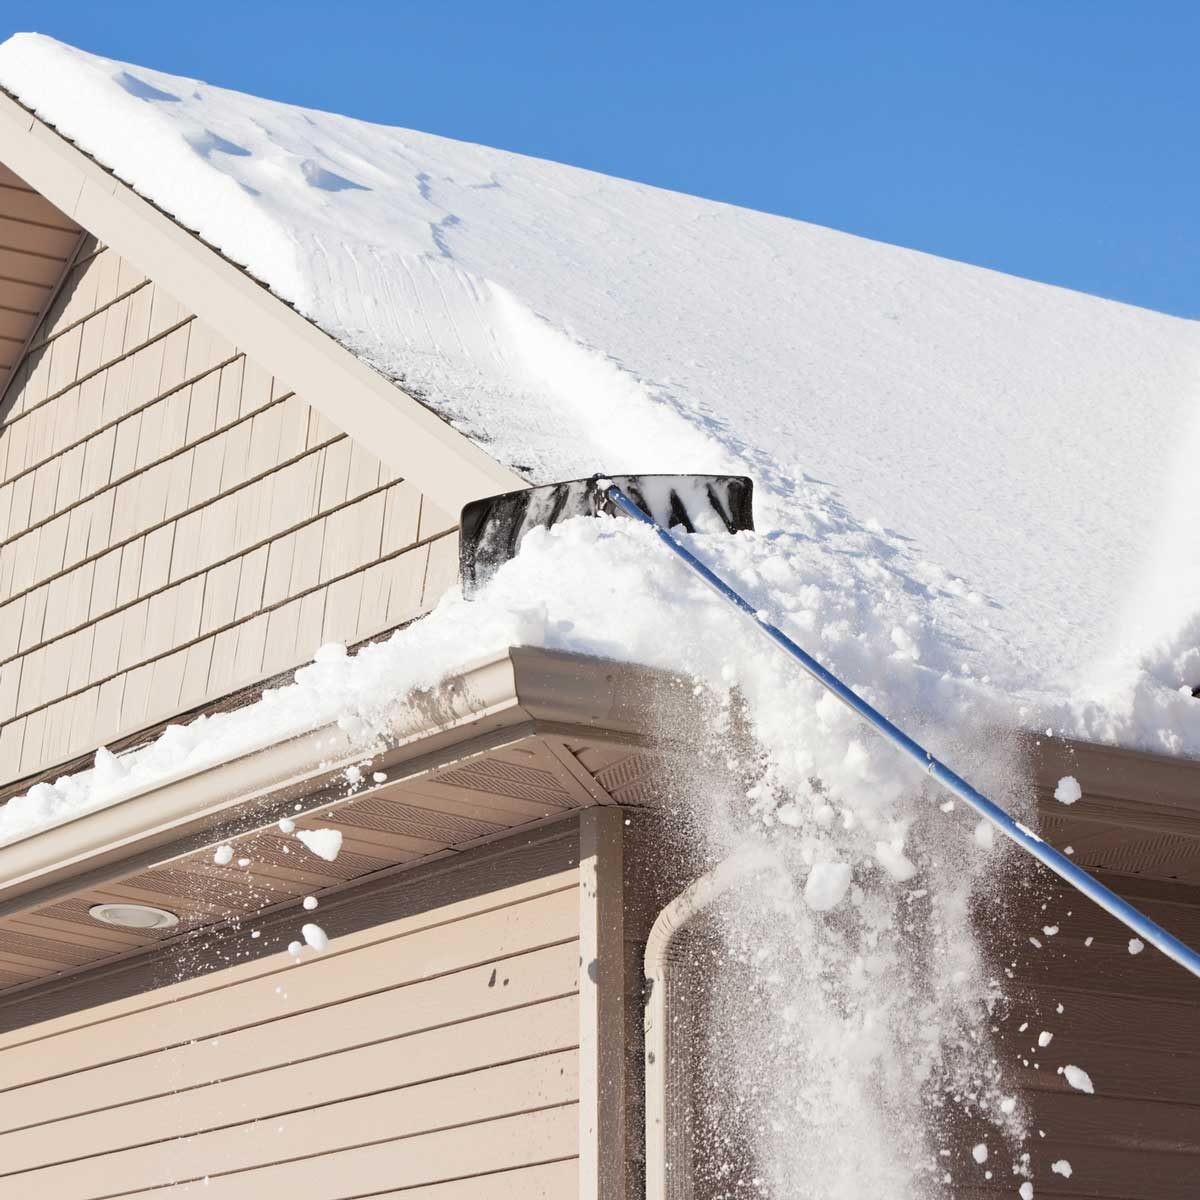 snowy-roof-GettyImages-475197095